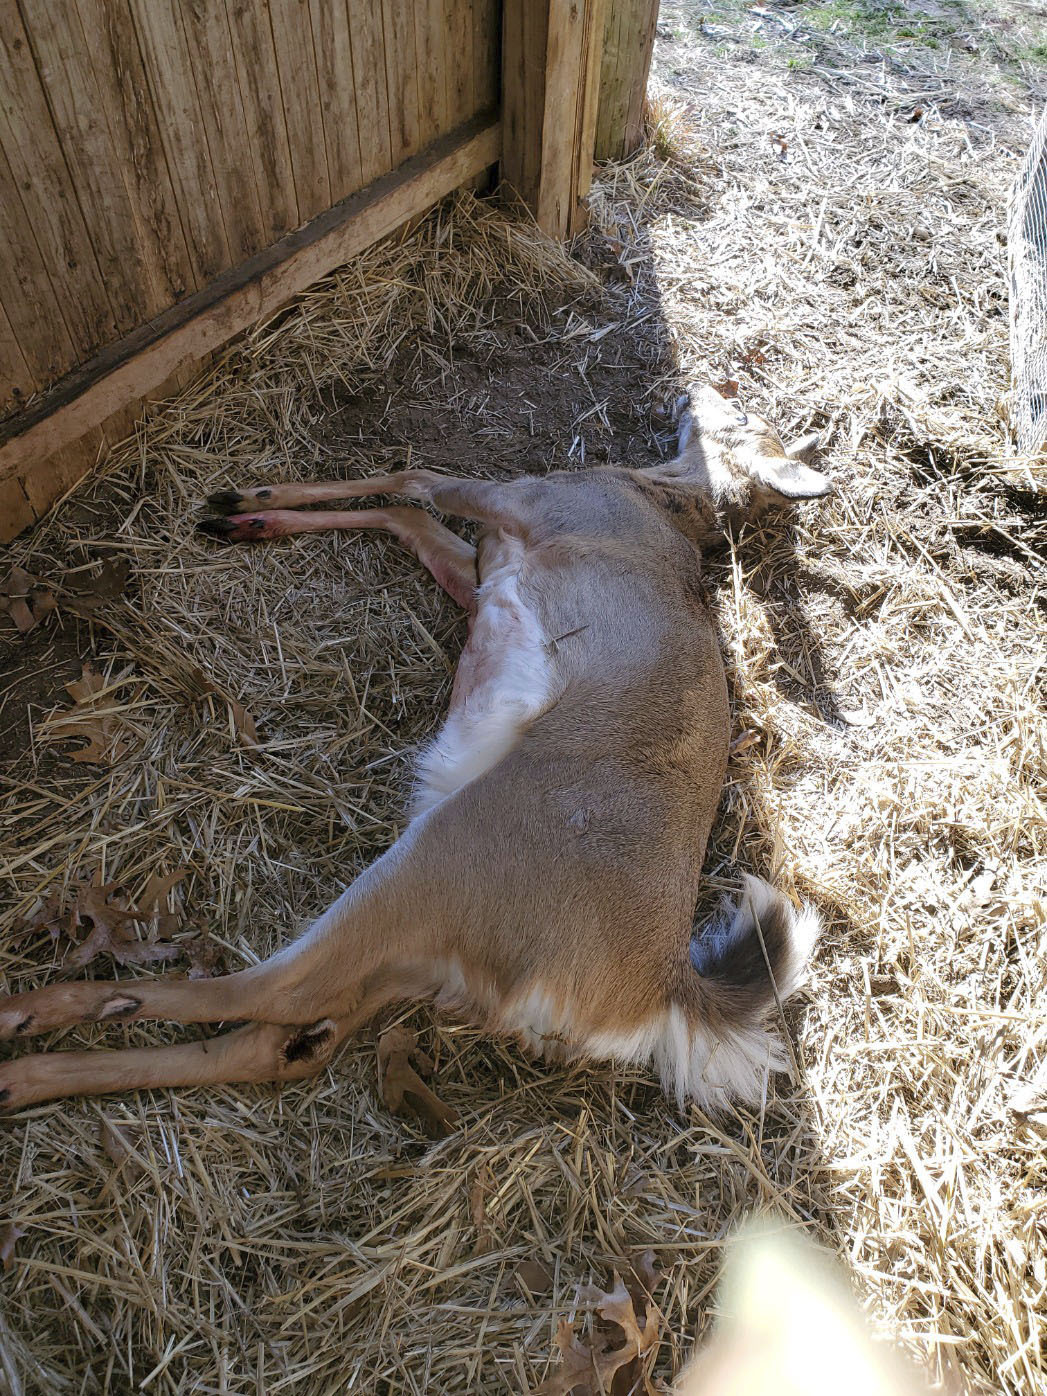 In January, a deer was shot and killed inside the perimeter of the Evelyn Alexander Wildlife Rescue Center in Hampton Bays.